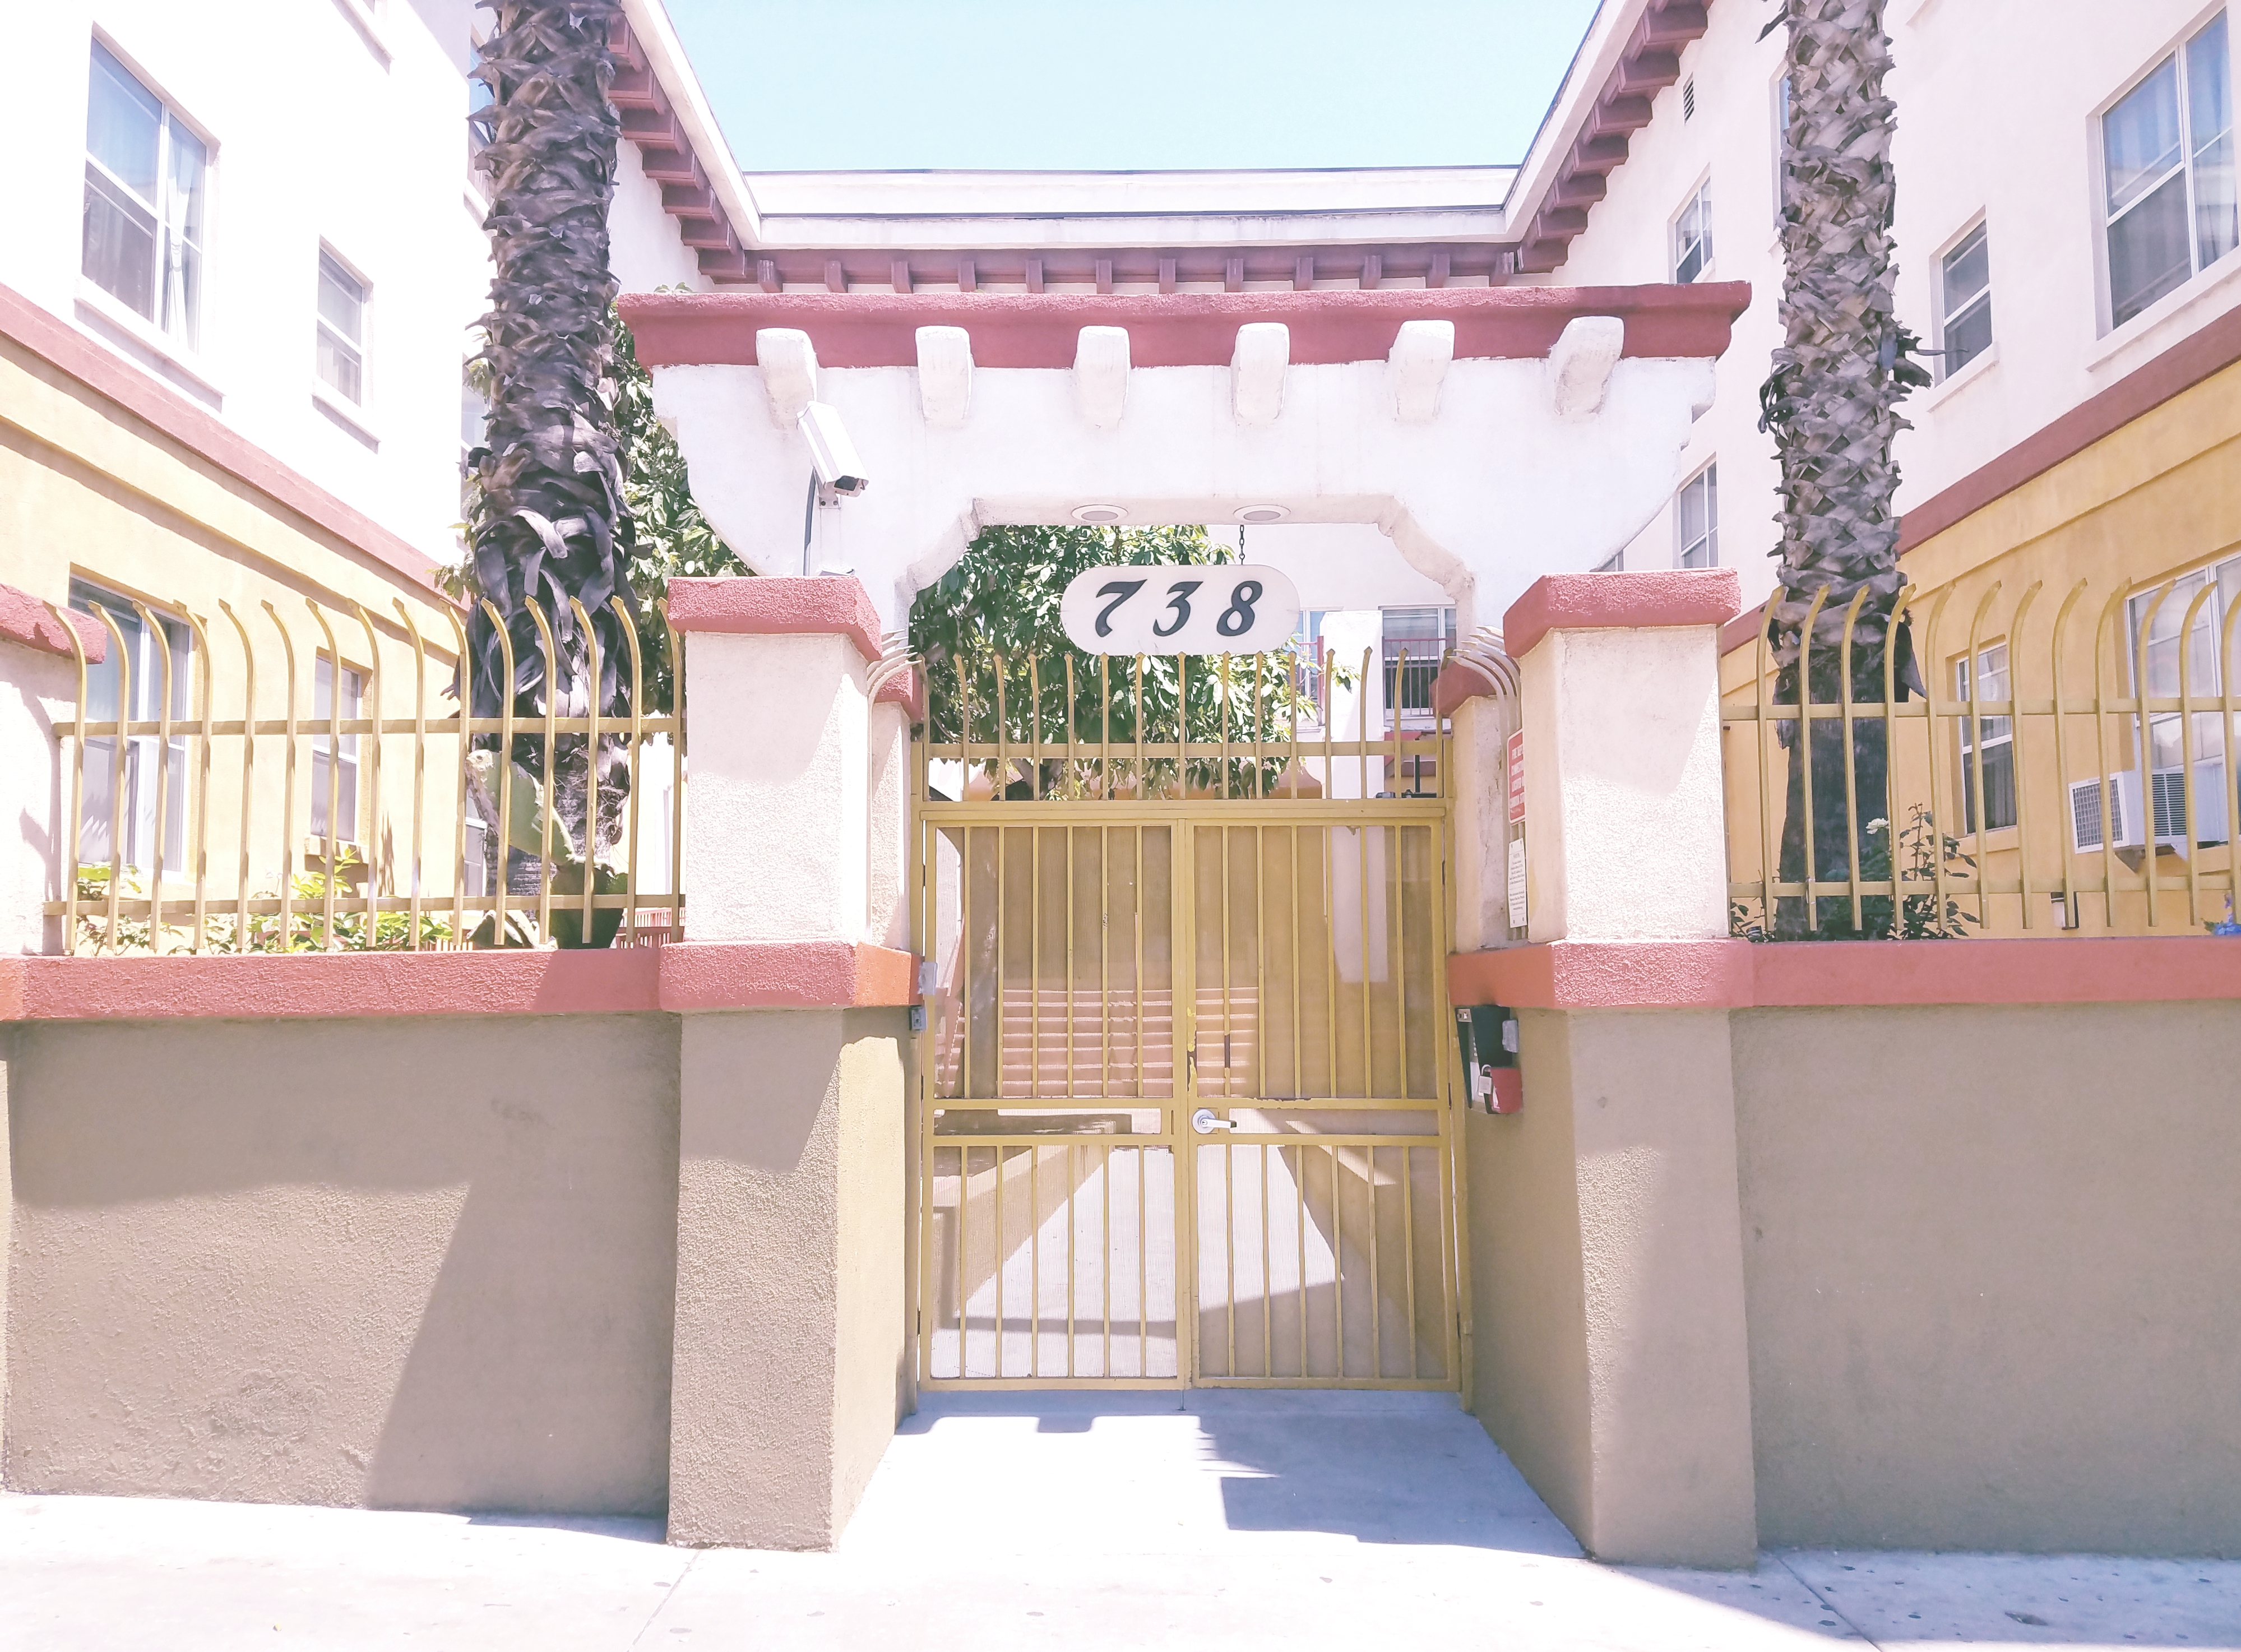 Image of the front entrance of the building with 738 written above the gate